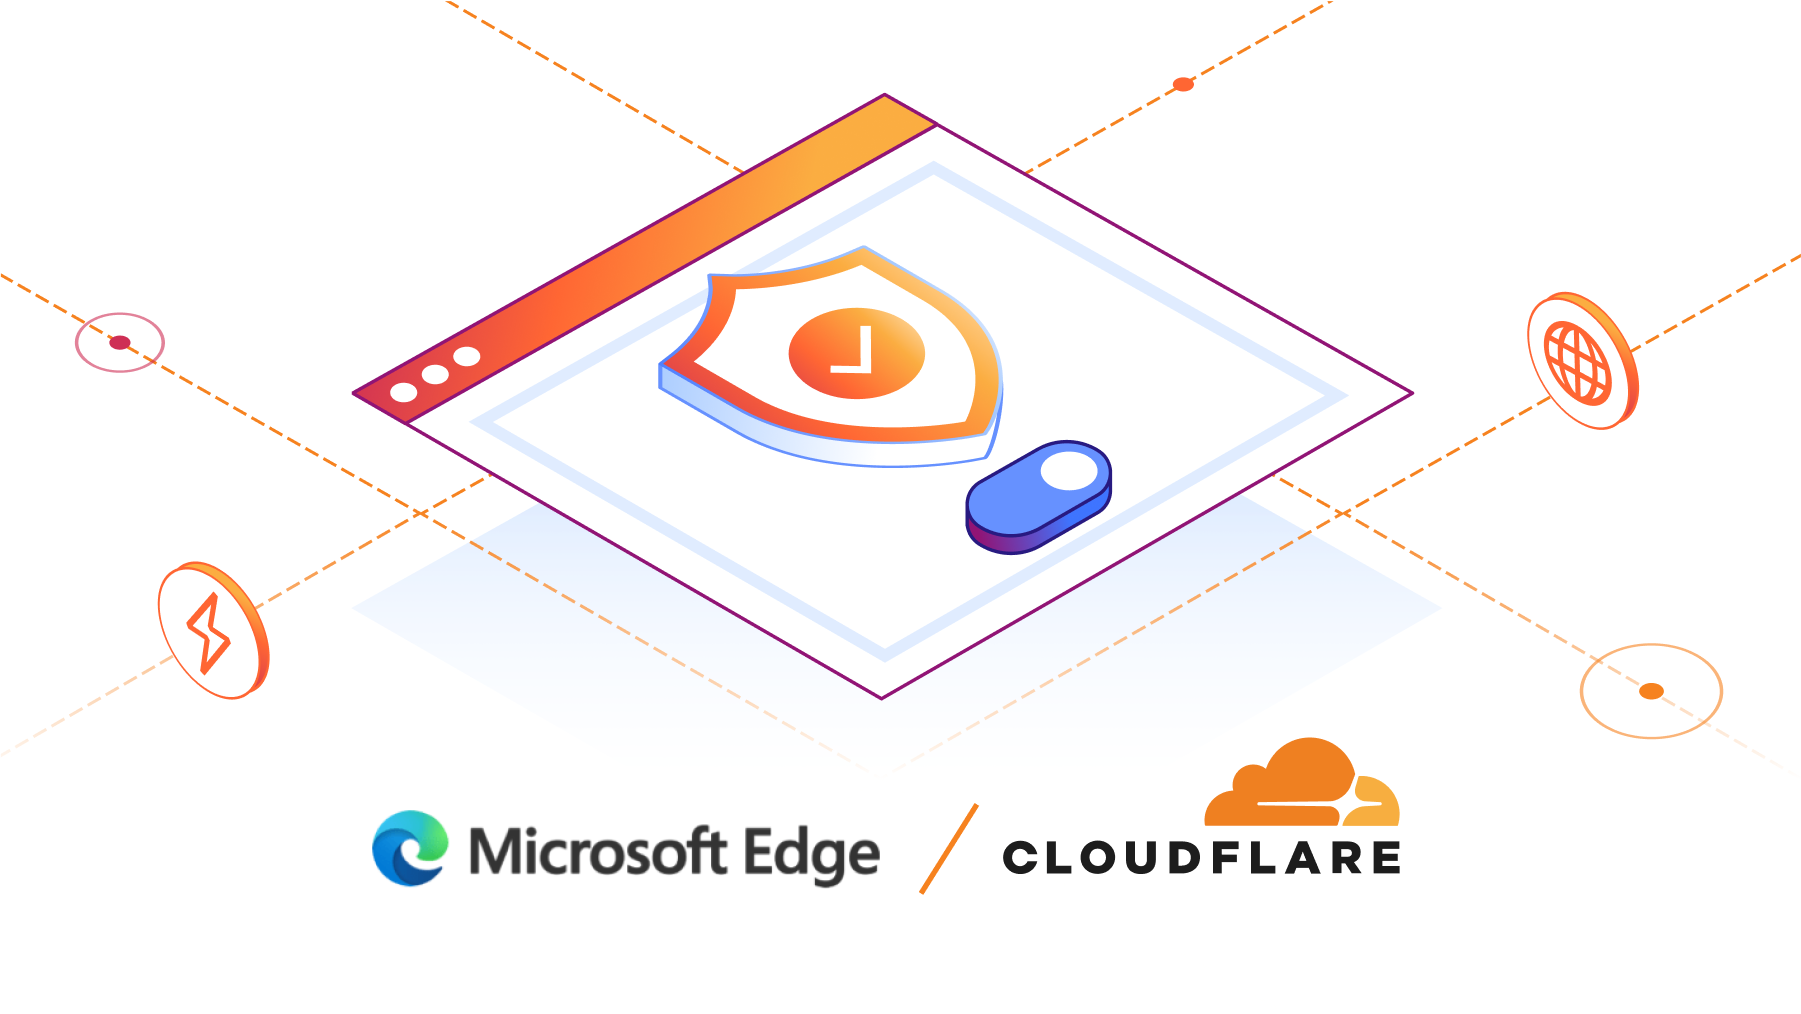 Cloudflare is now powering Microsoft Edge Secure Network